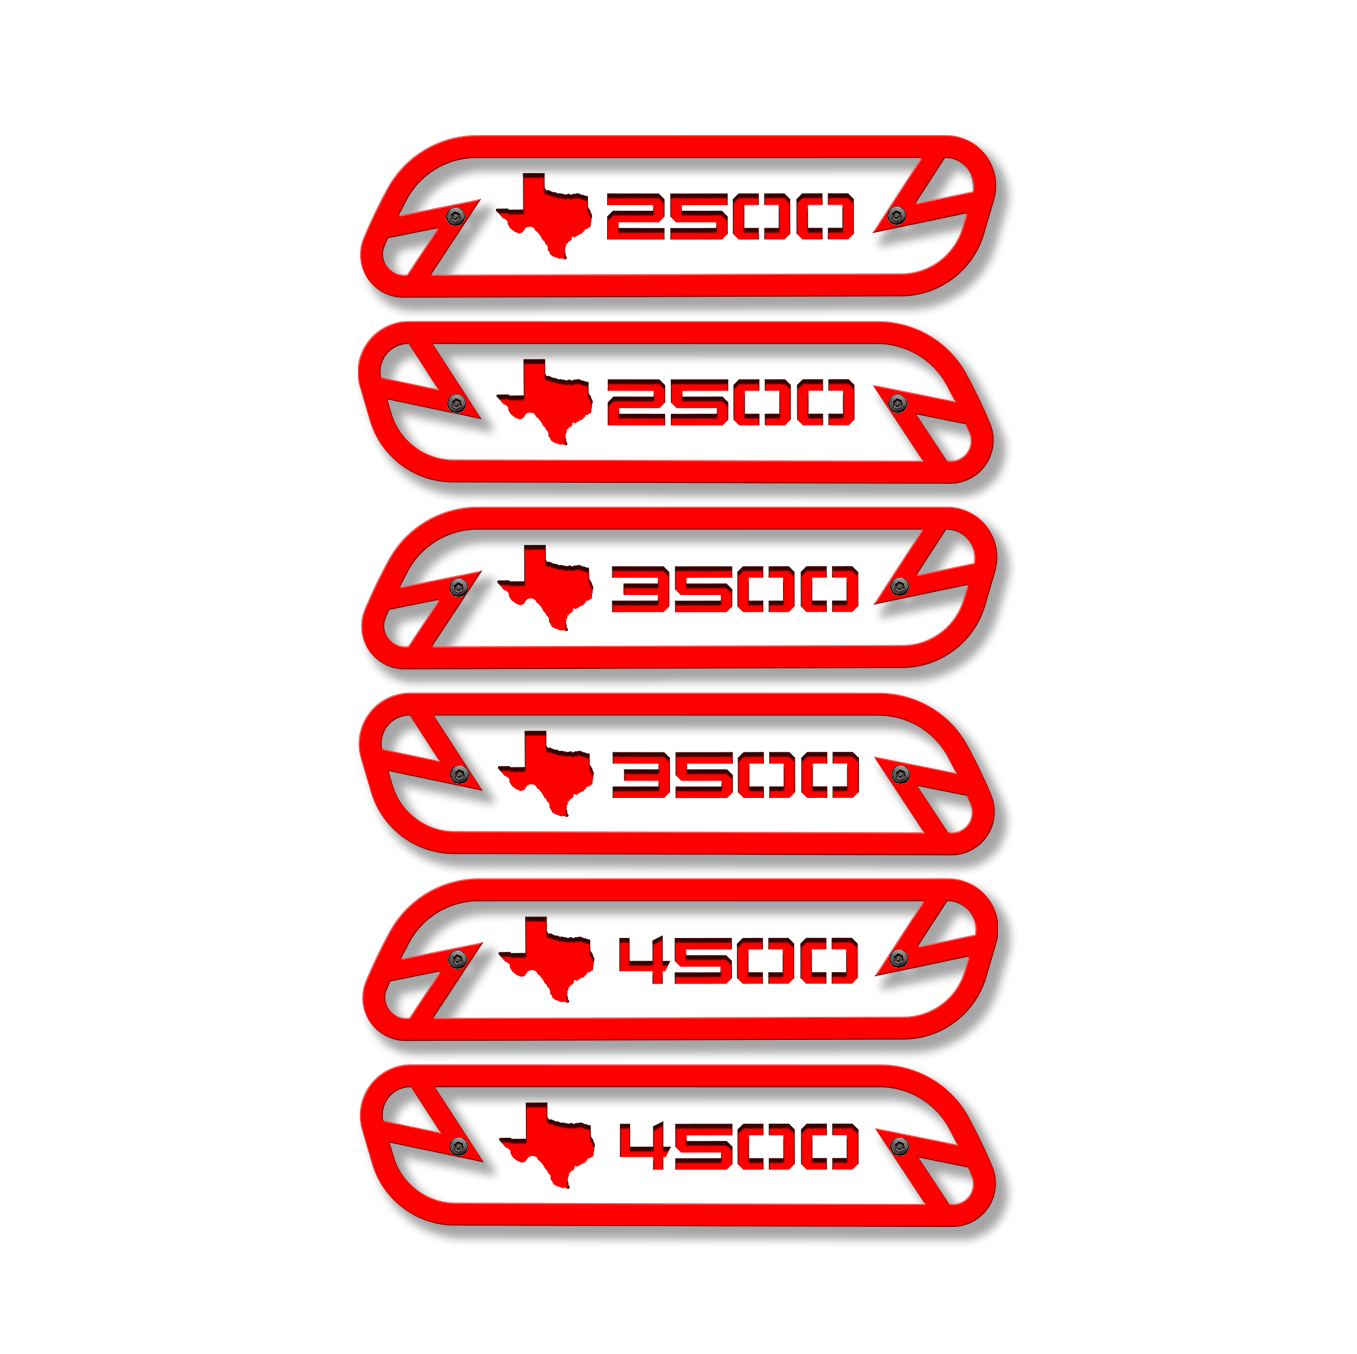 Texas 2500/3500/4500 Hood Emblem Replacements - Fits 2019-2022 Ram® 2500, 3500, 4500 - Fully Customizable, LED or Non-LED